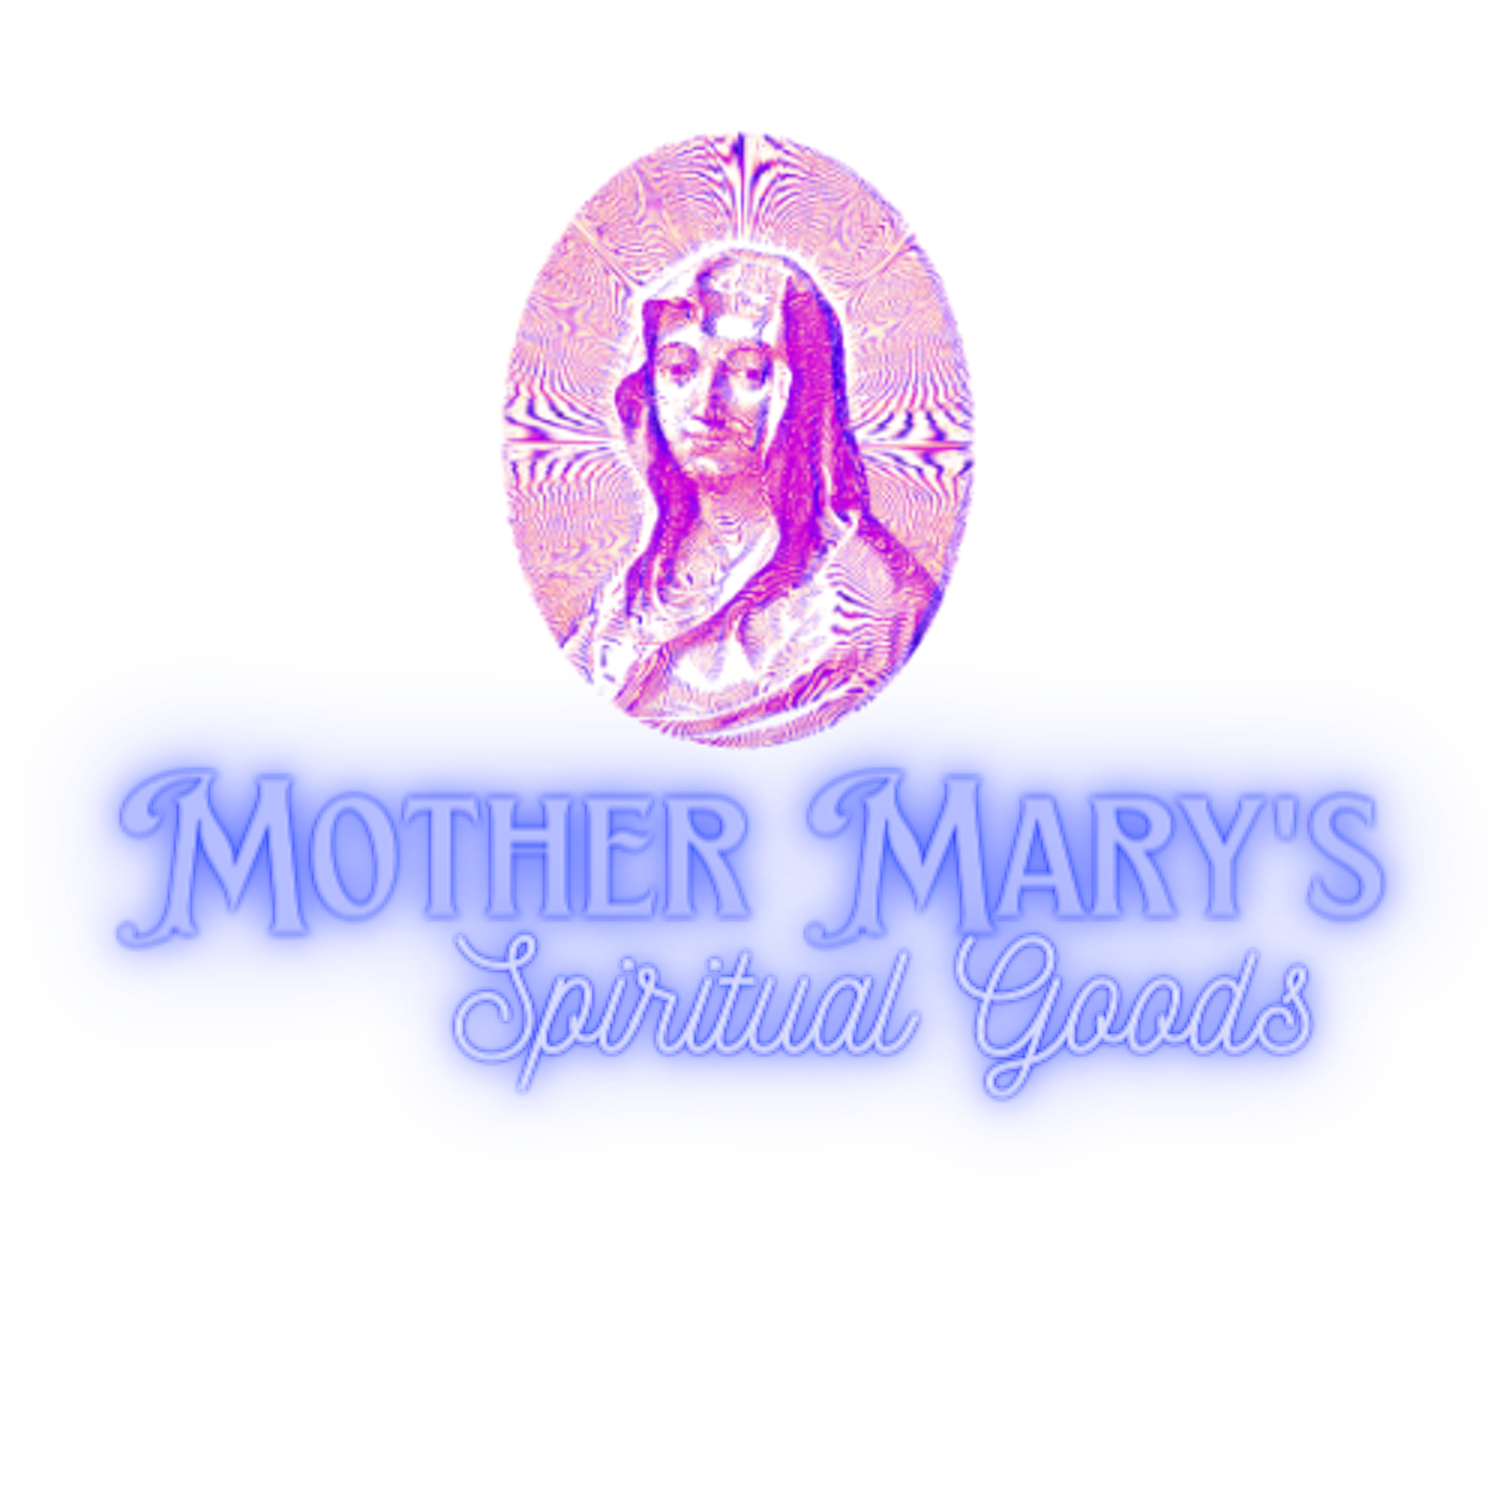 Mother Mary's Spiritual Goods